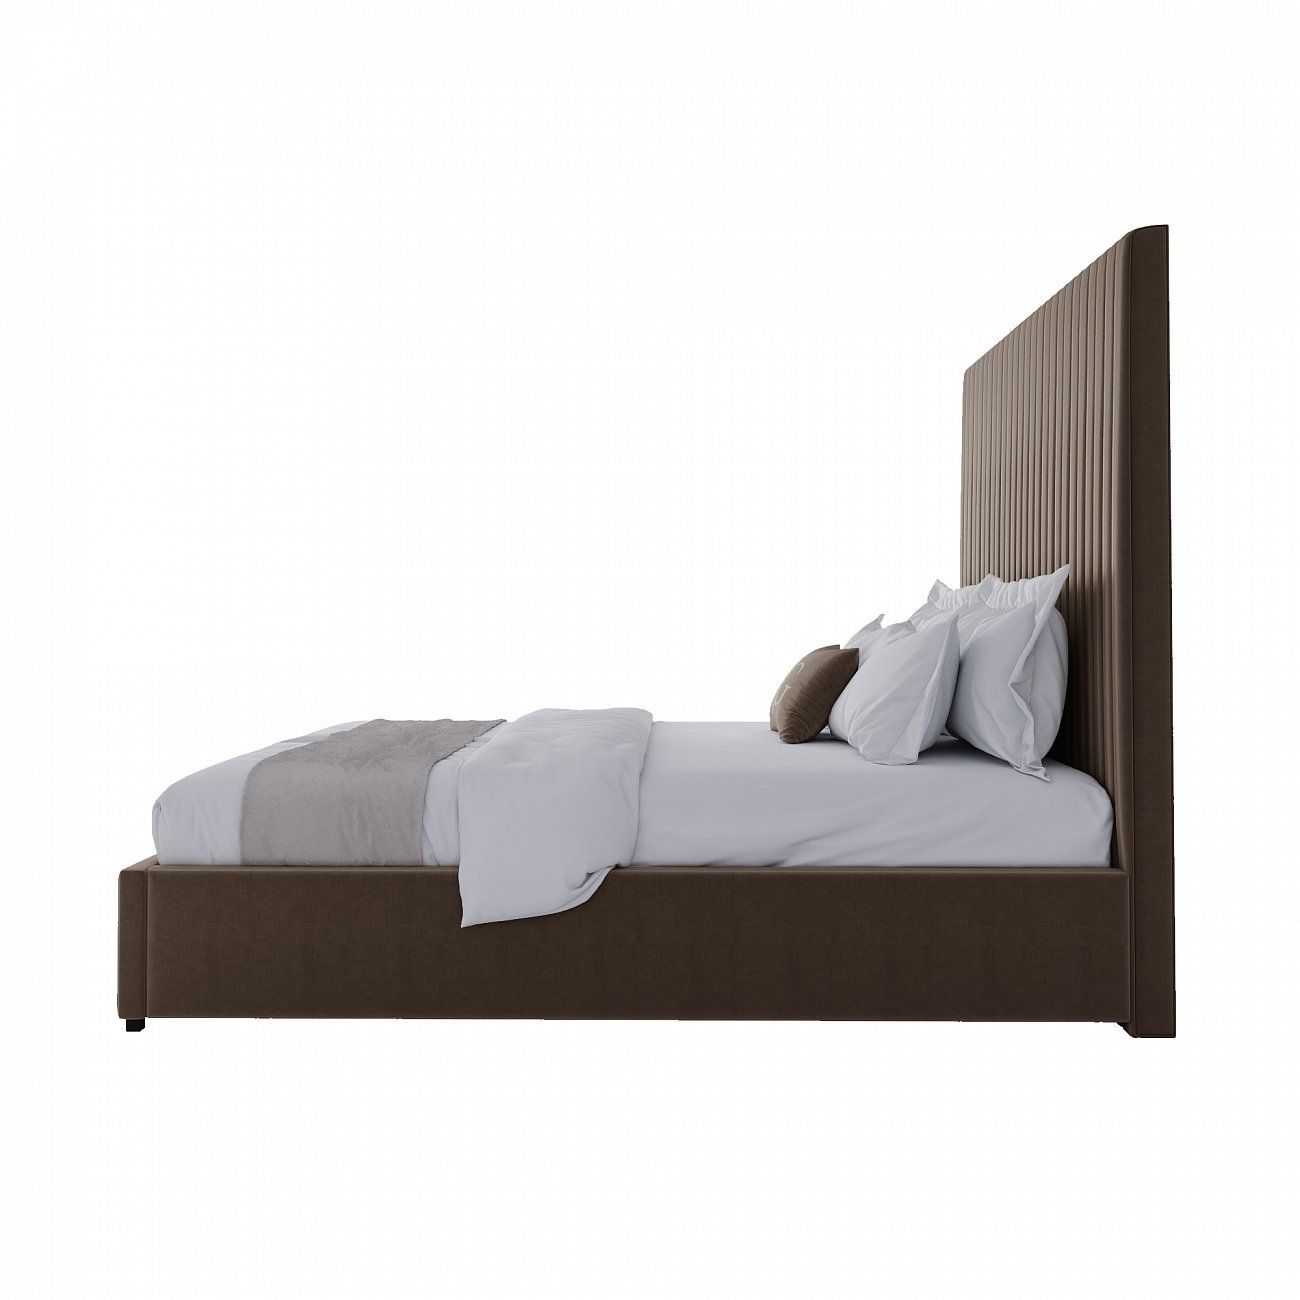 Double bed 160x200 brown Mora